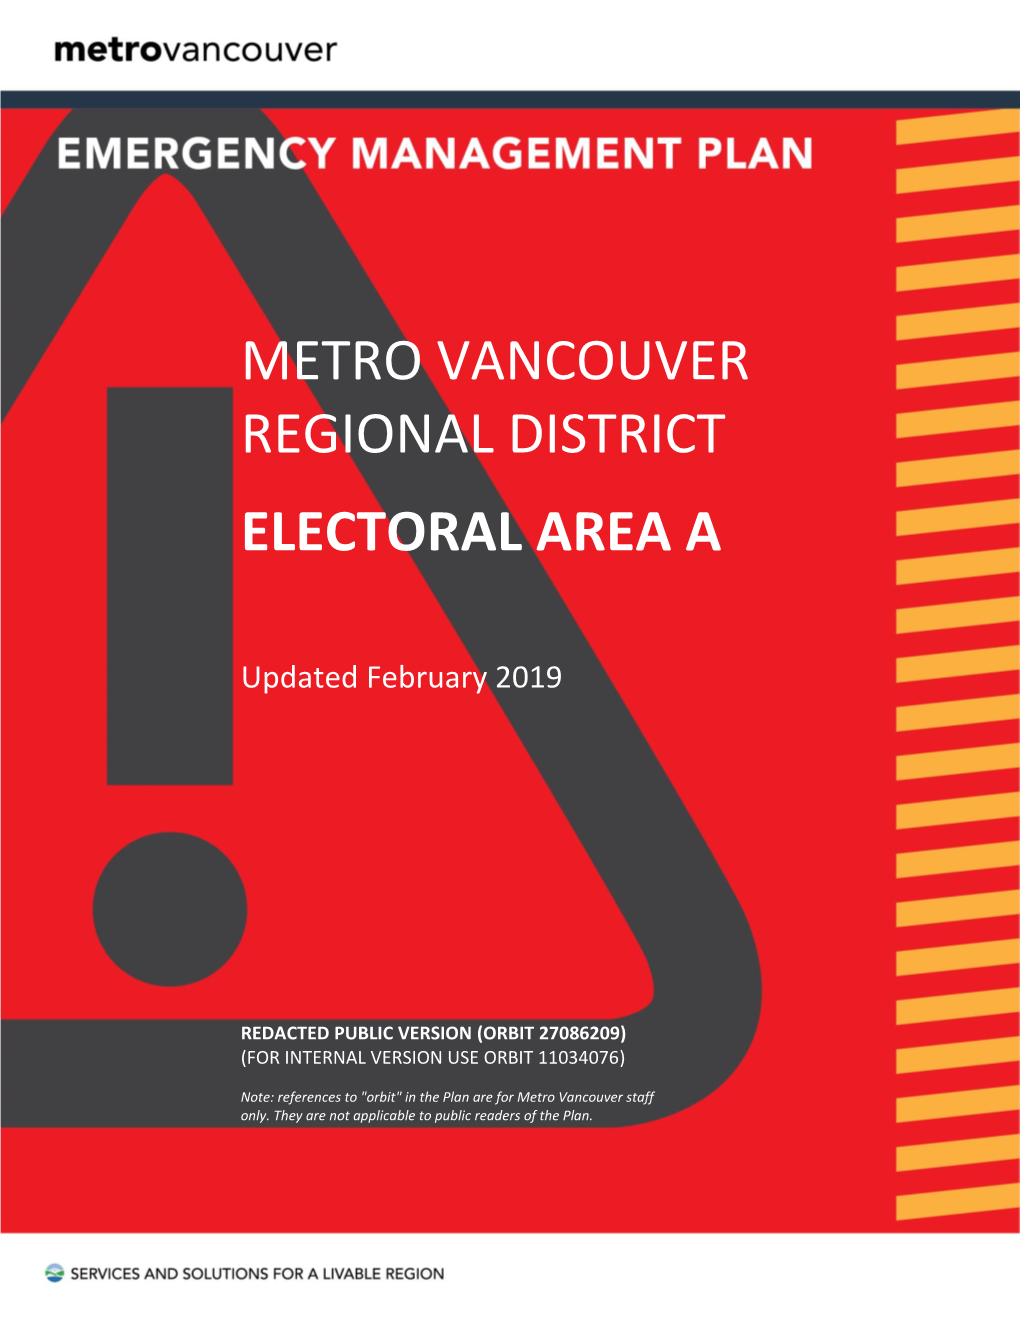 Metro Vancouver's Electoral Area a Emergency Management Plan